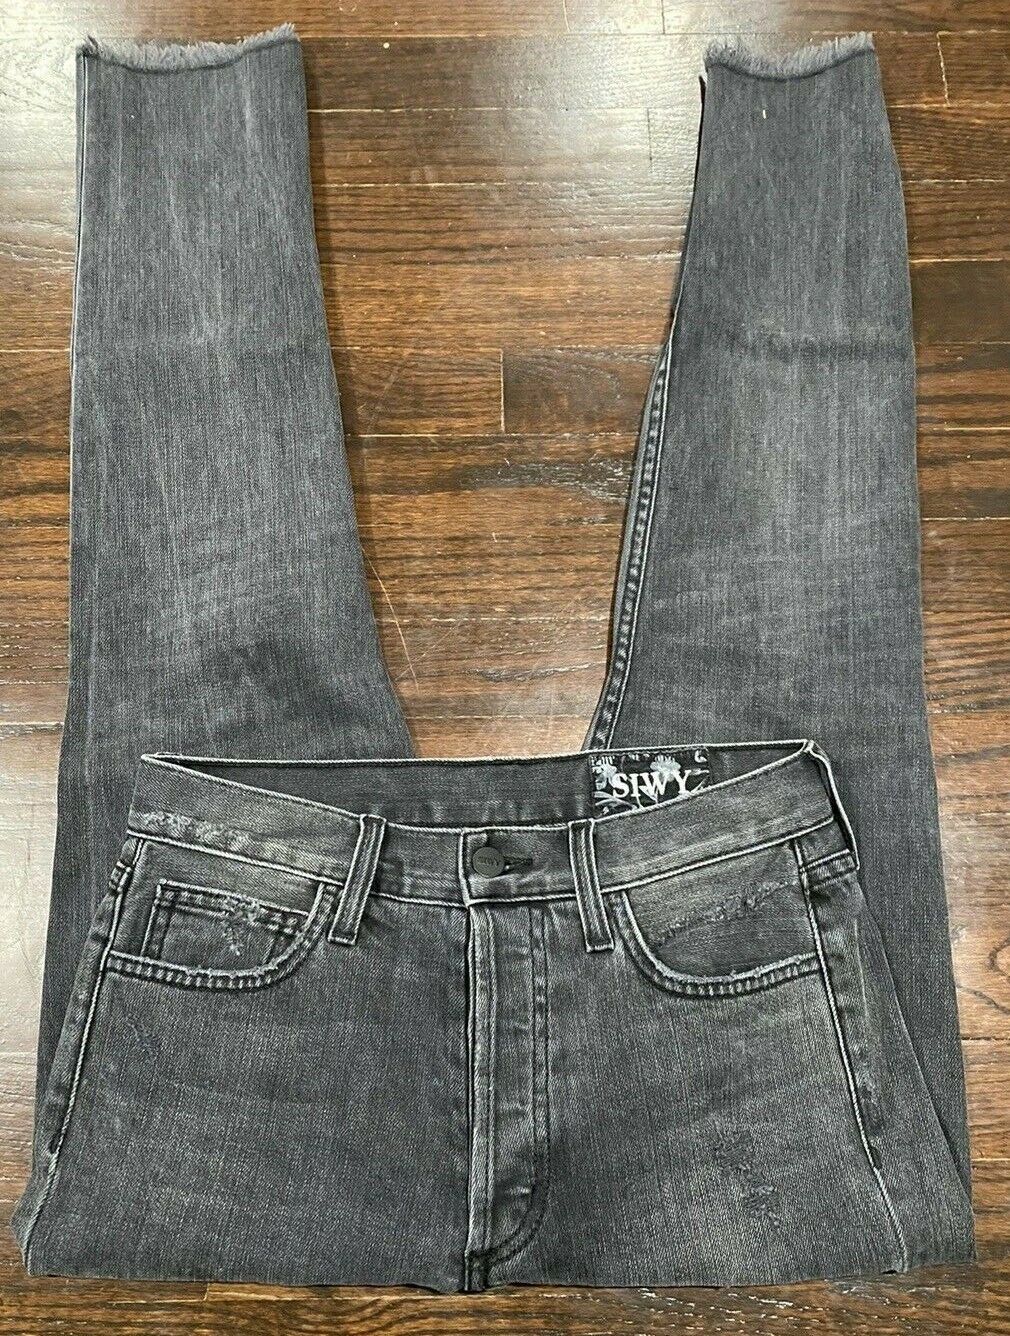 SIWY Los Angeles Waisted Jeans Size 26 Button Fly Raw Crop | eBay